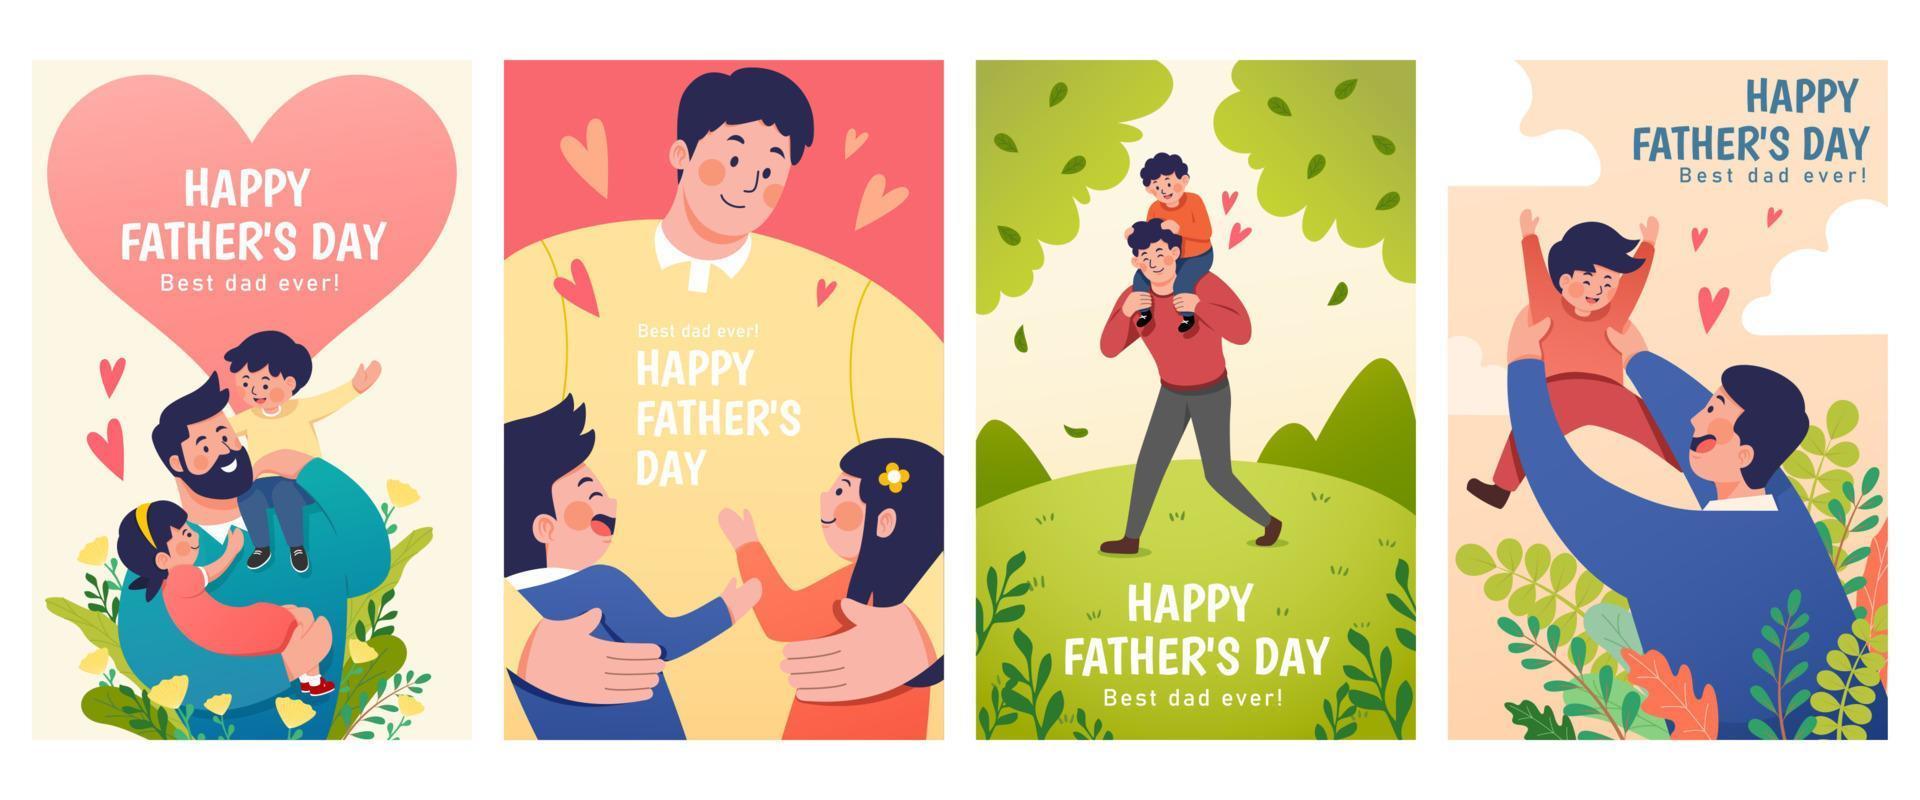 Set of Father's Day illustrations depict dads taking care of their children. Concept of fatherhood, parenting, and childhood in flat design. vector